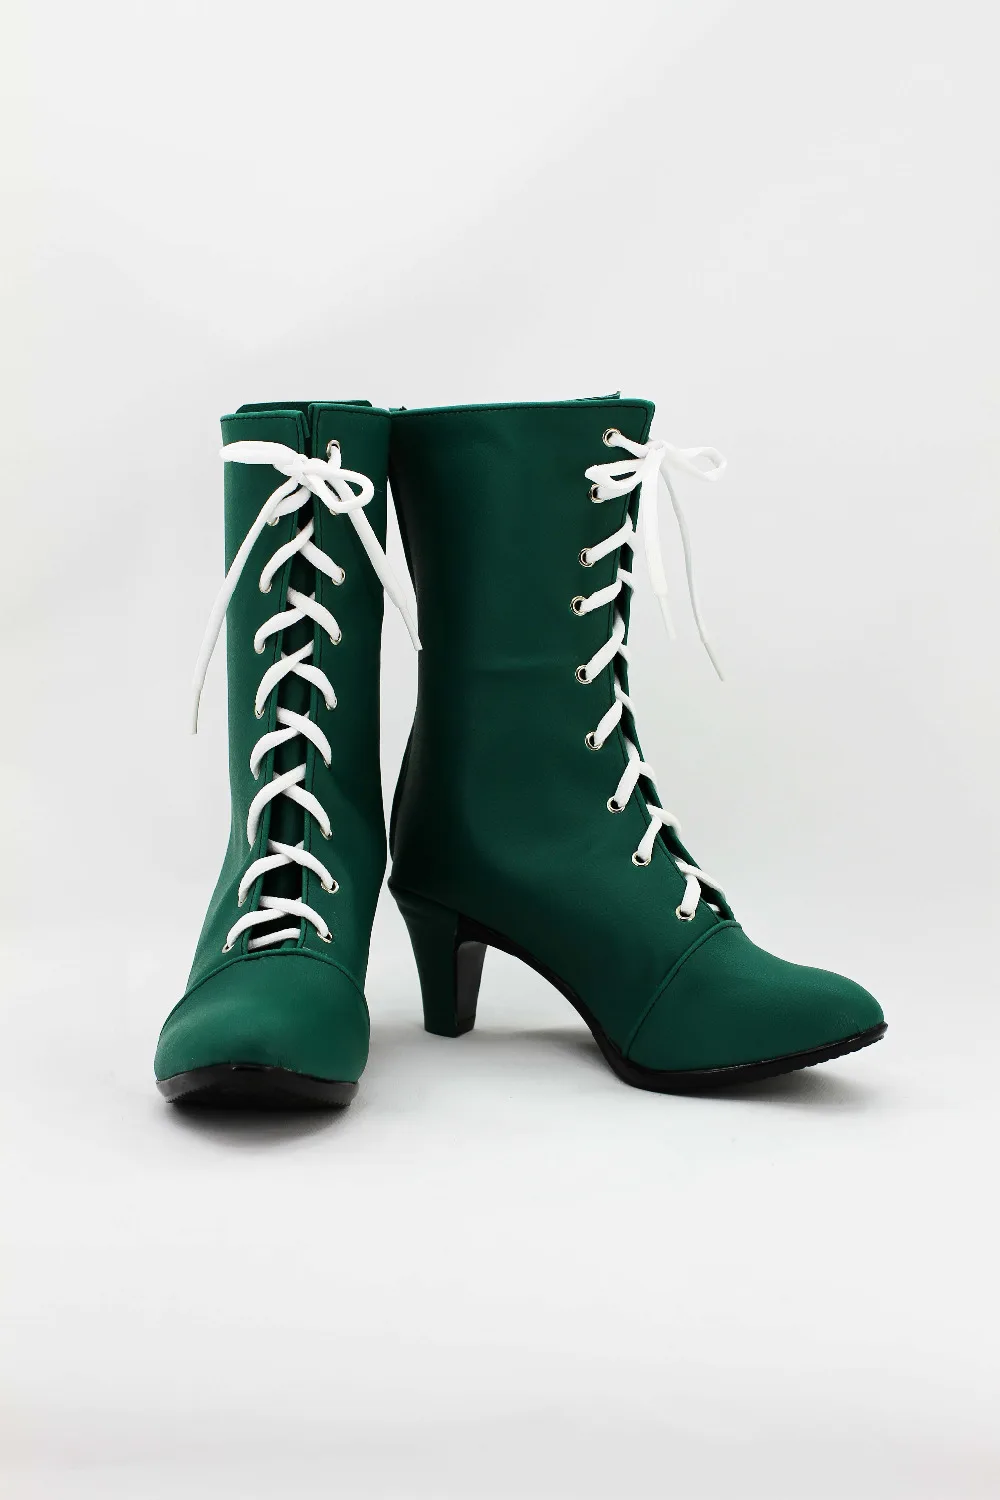 Pretty Soldier Sailor Moon Sailor Jupiter cosplay shoes